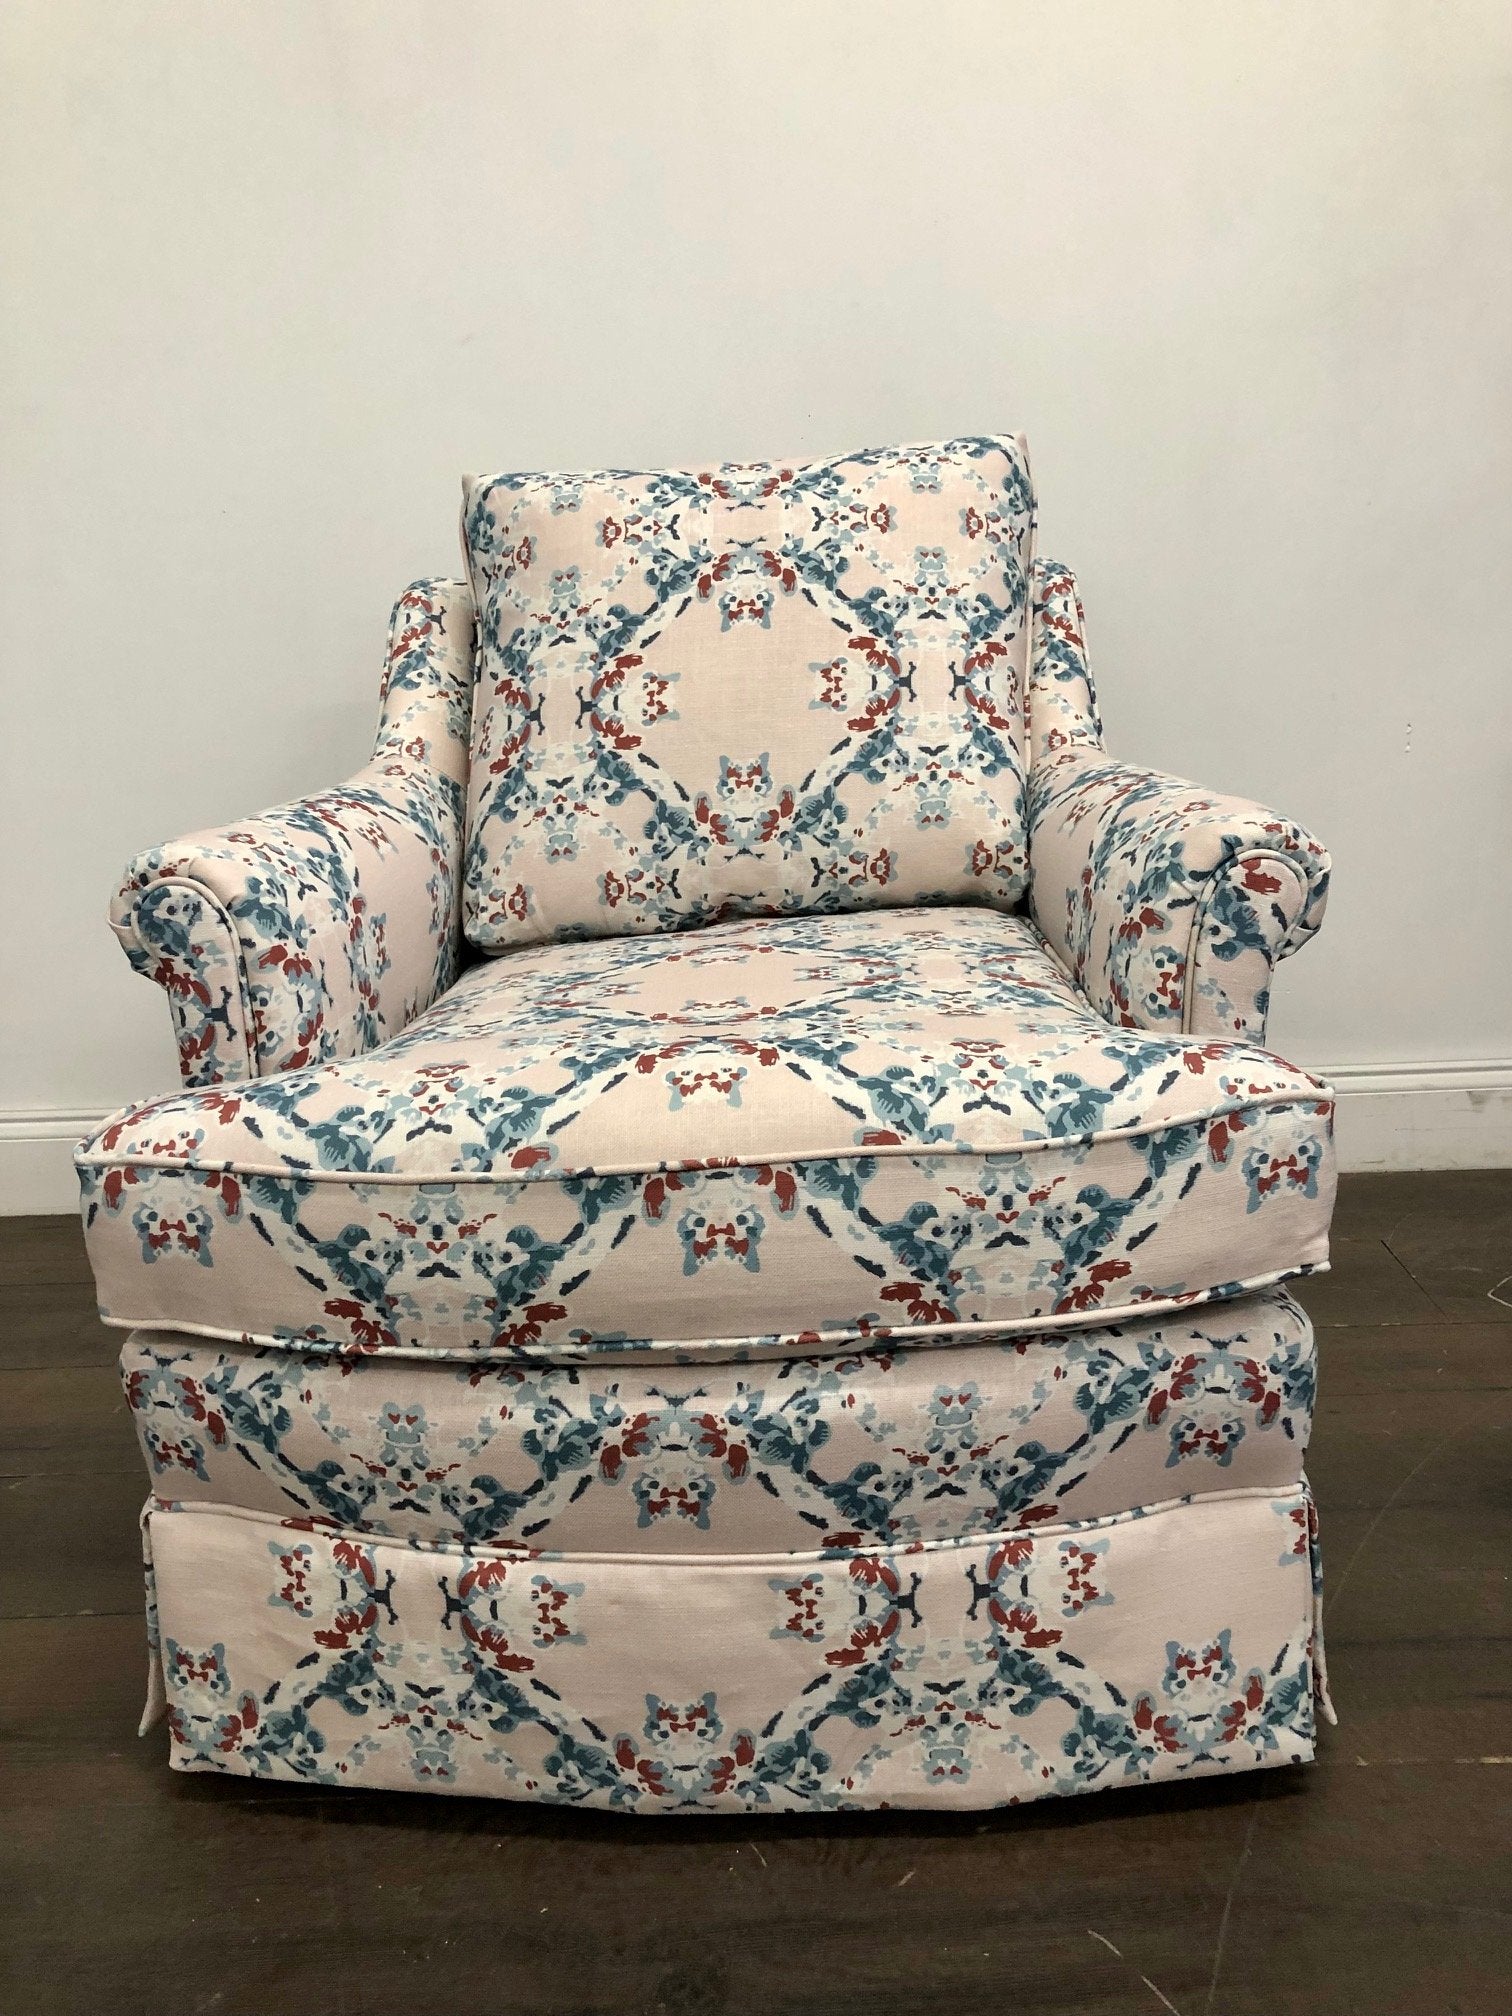 AVAILABLE: Upholstered Arm Chair in blush / blue floral print